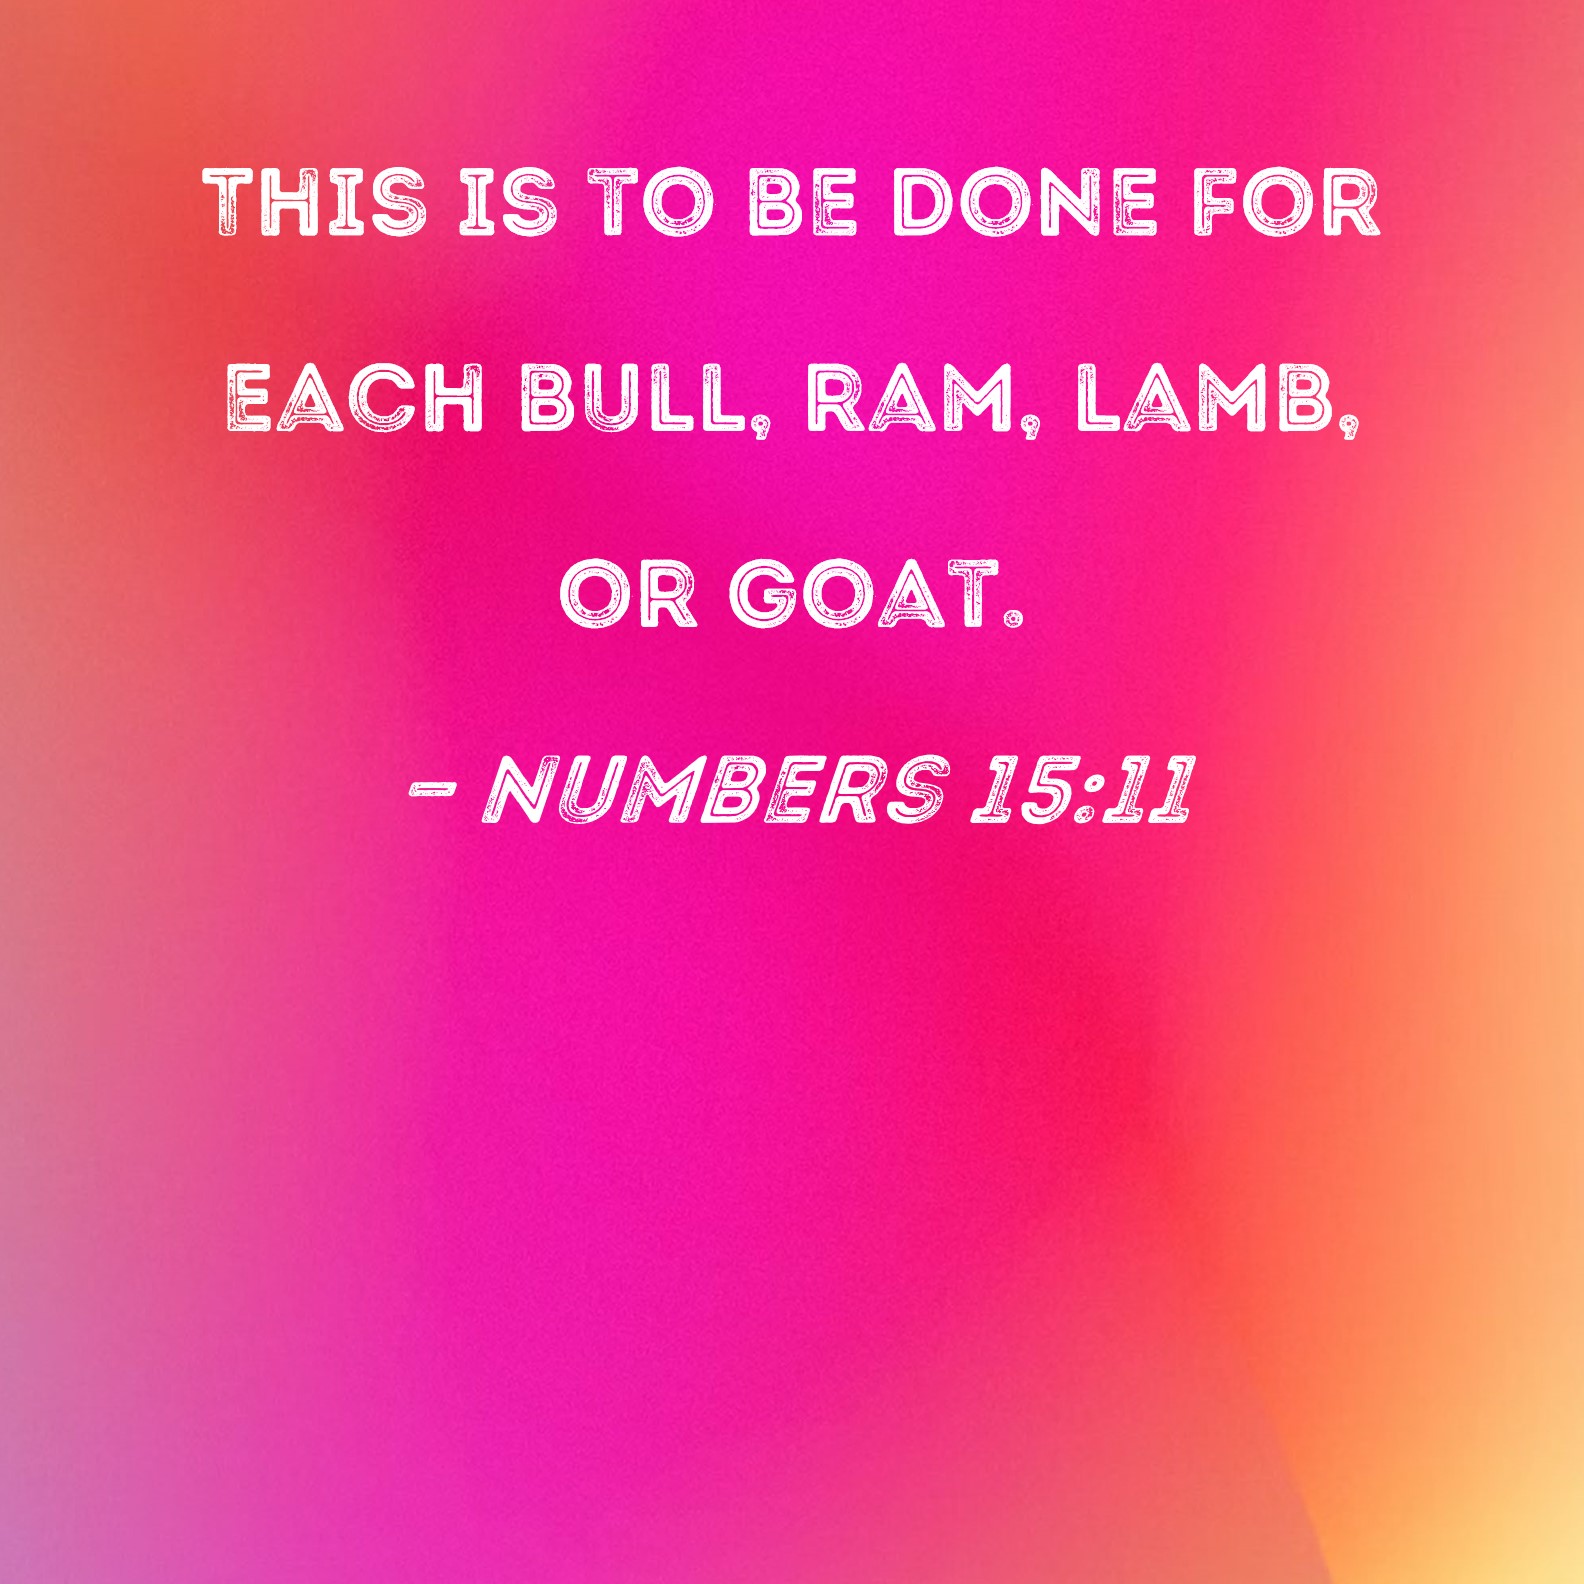 numbers-15-11-this-is-to-be-done-for-each-bull-ram-lamb-or-goat